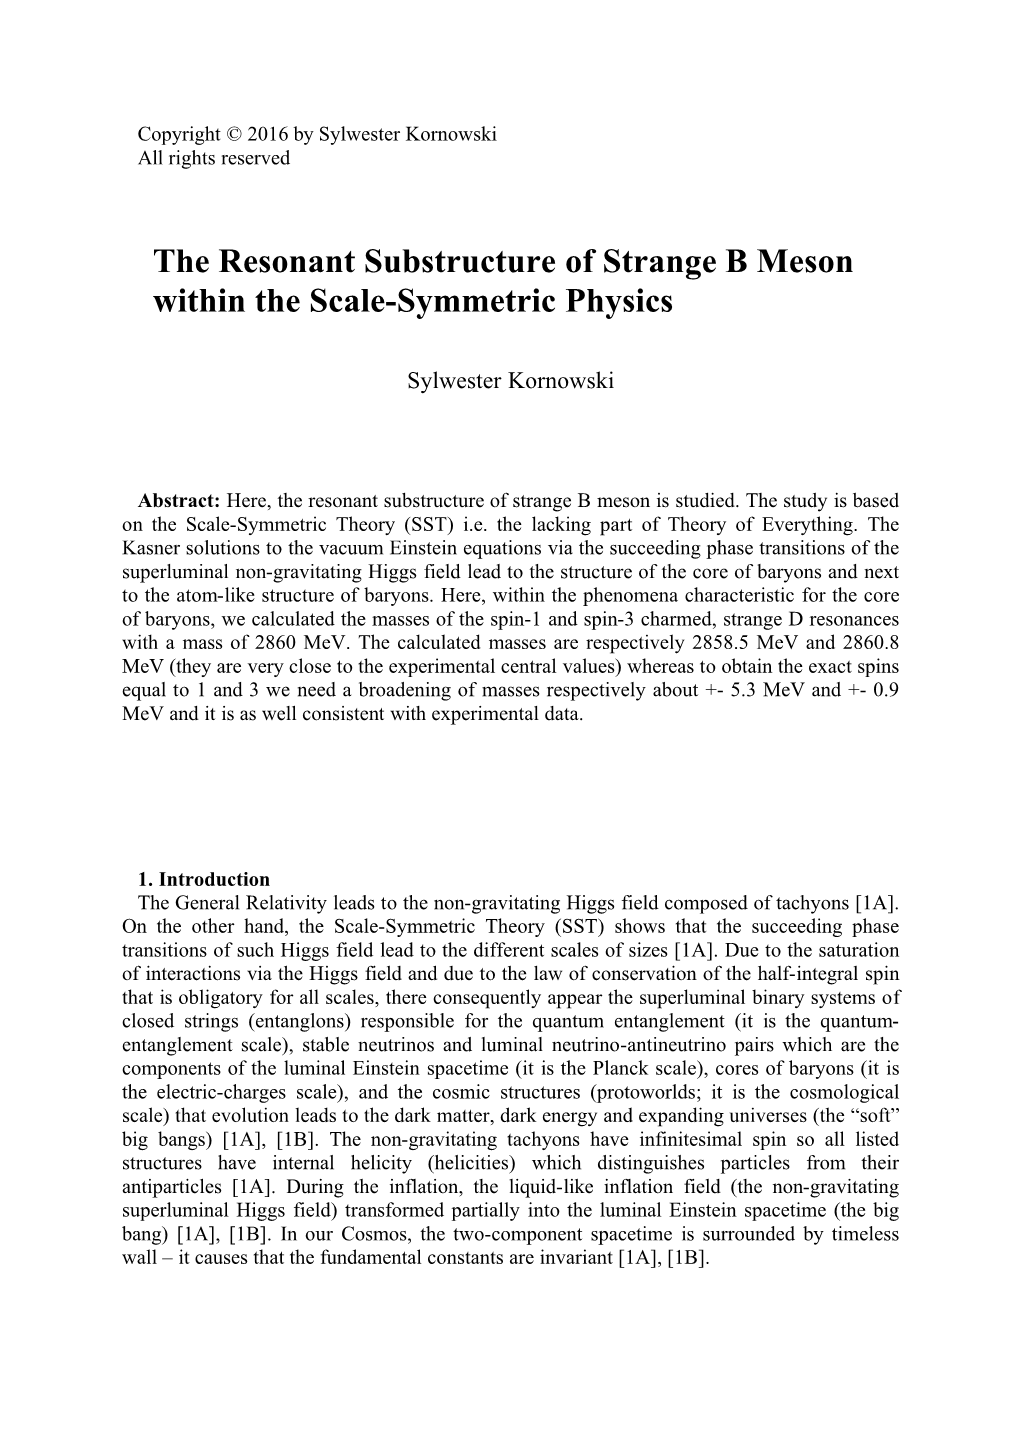 The Resonant Substructure of Strange B Meson Within the Scale-Symmetric Physics